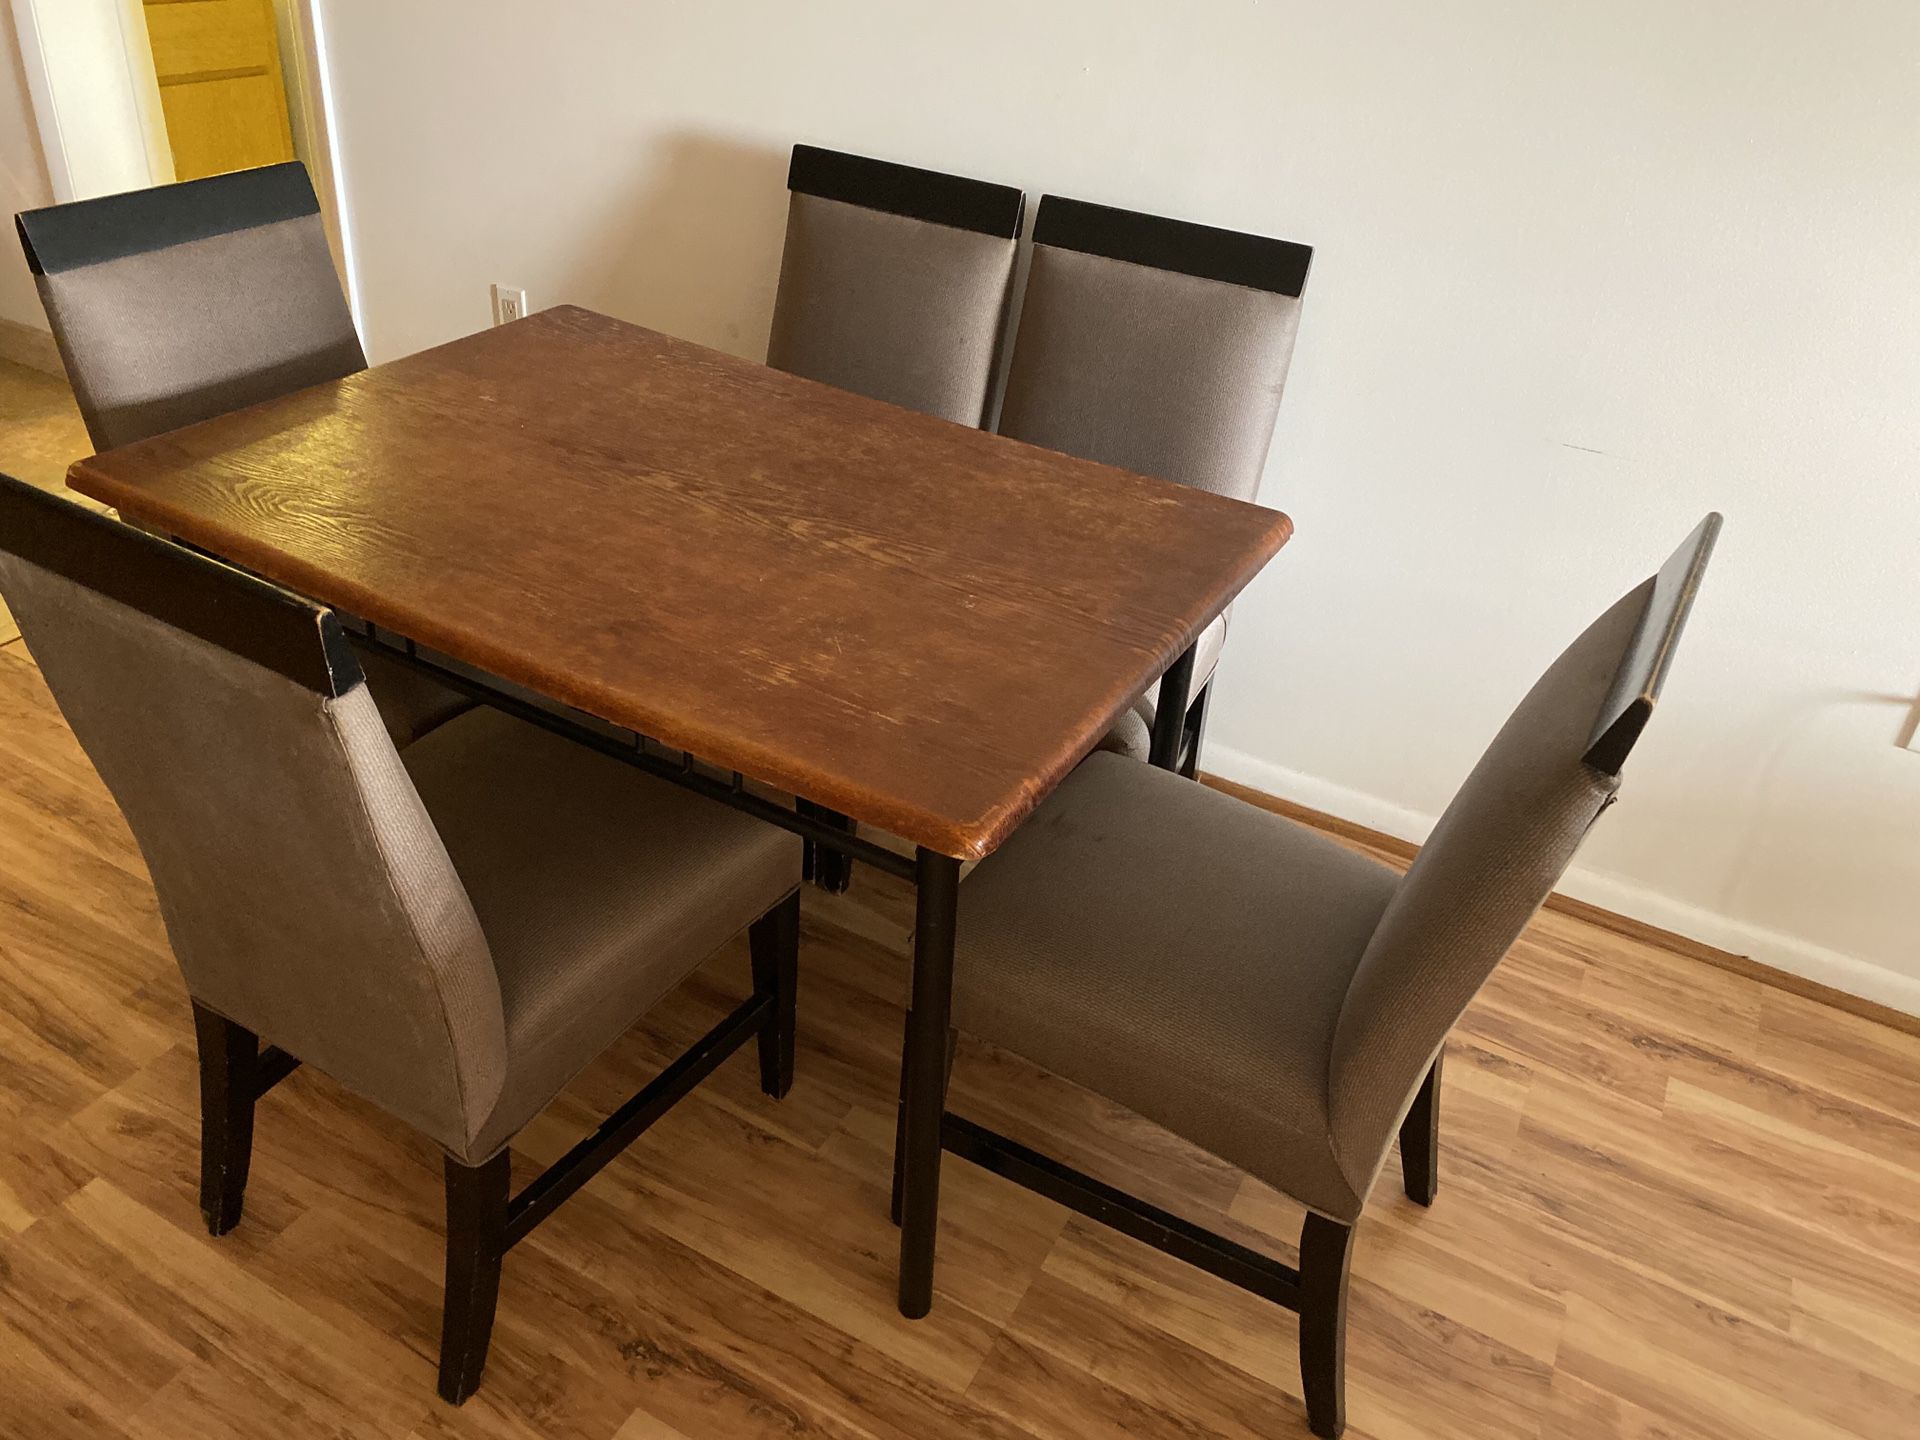 Dining room table with 5 custom made chairs.